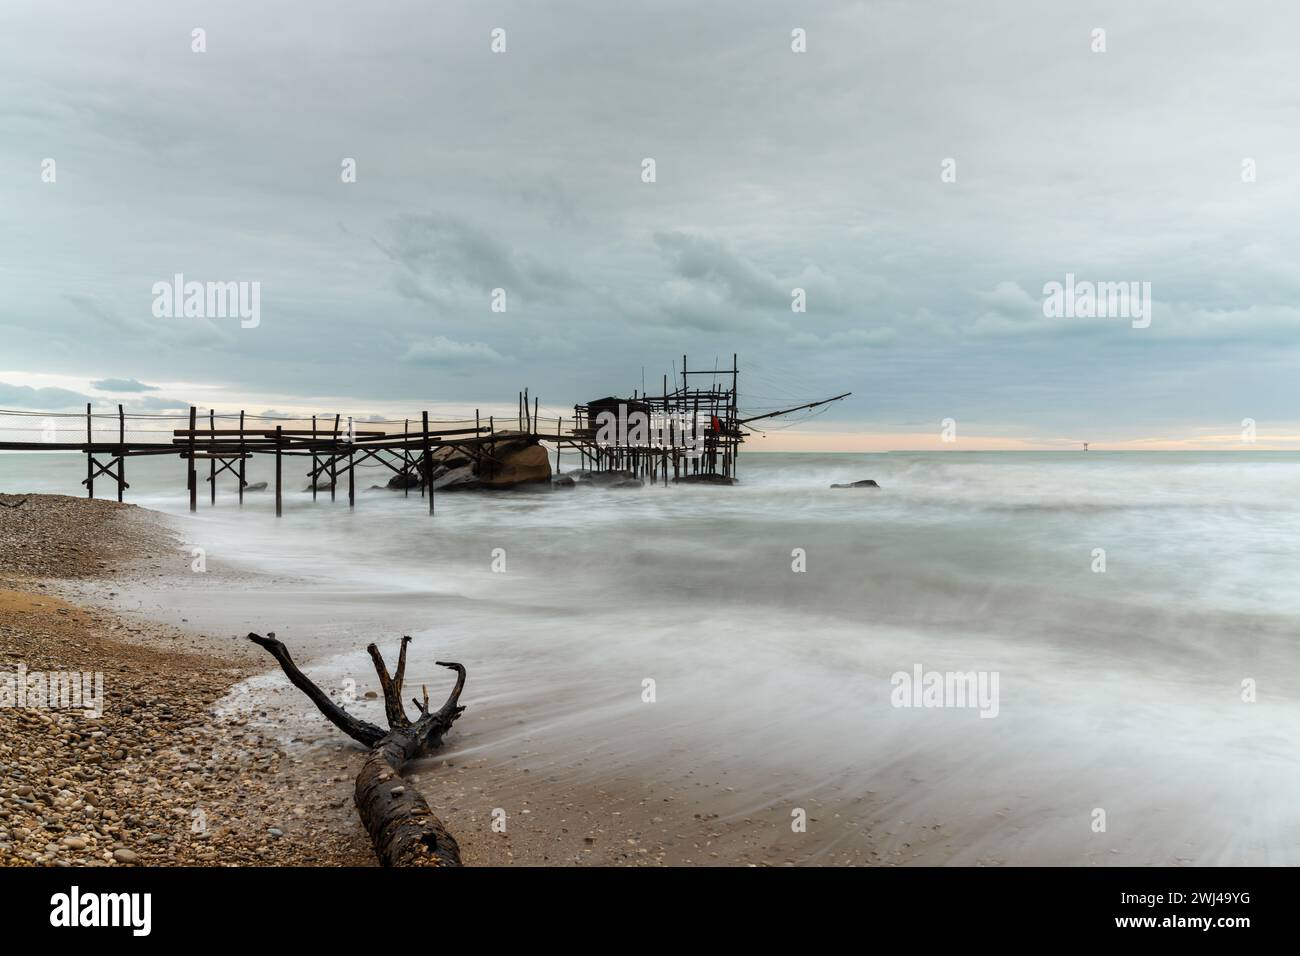 View of the Trabocco Punto le Morge pile dwelling on an overcast an rainy day on the Costa dei Trabocchi in Italy Stock Photo